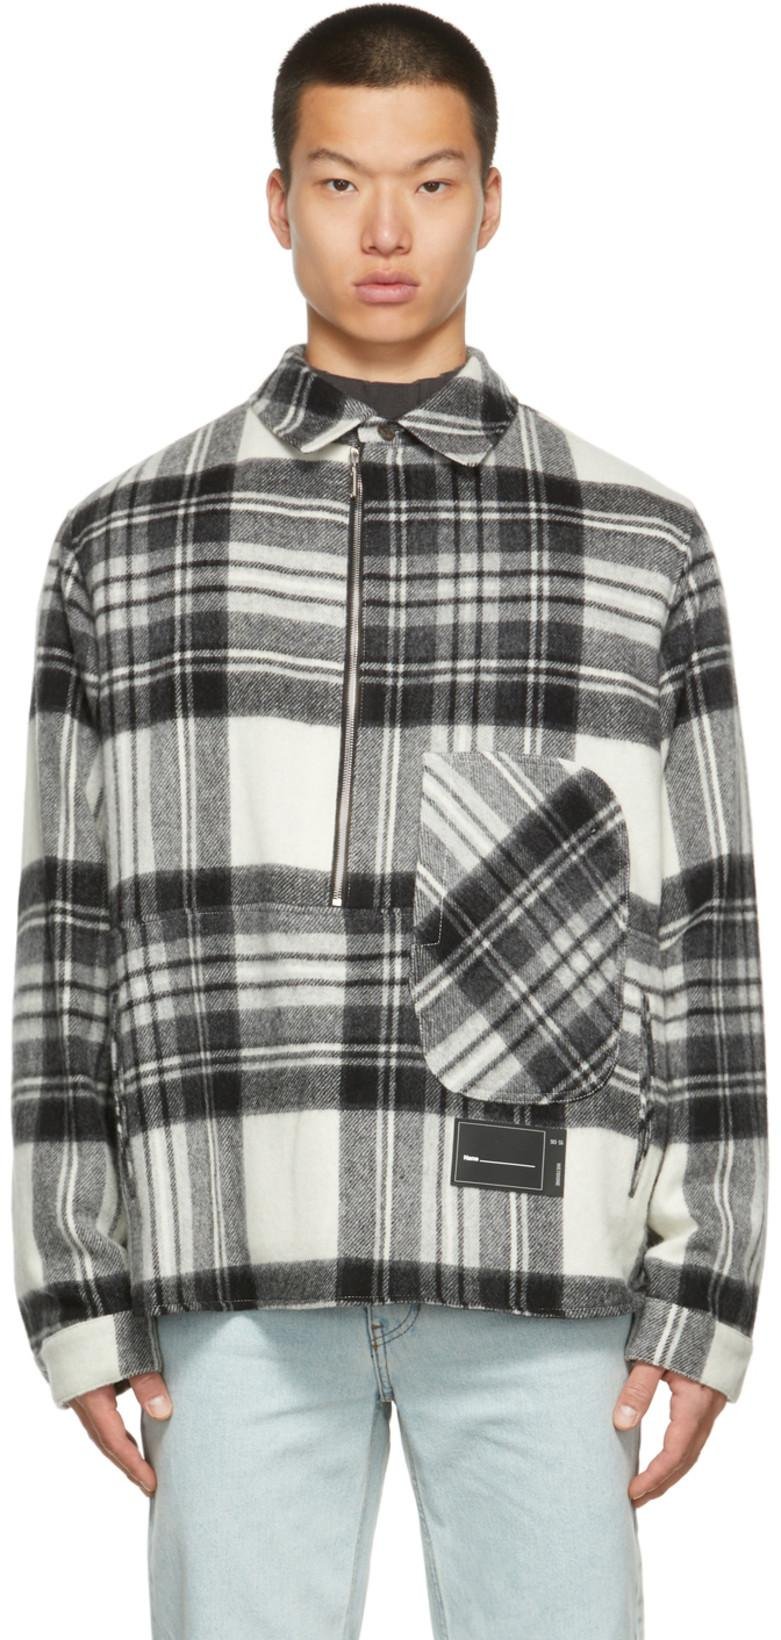 Wool Check Anorak Shirt by WE11DONE | jellibeans